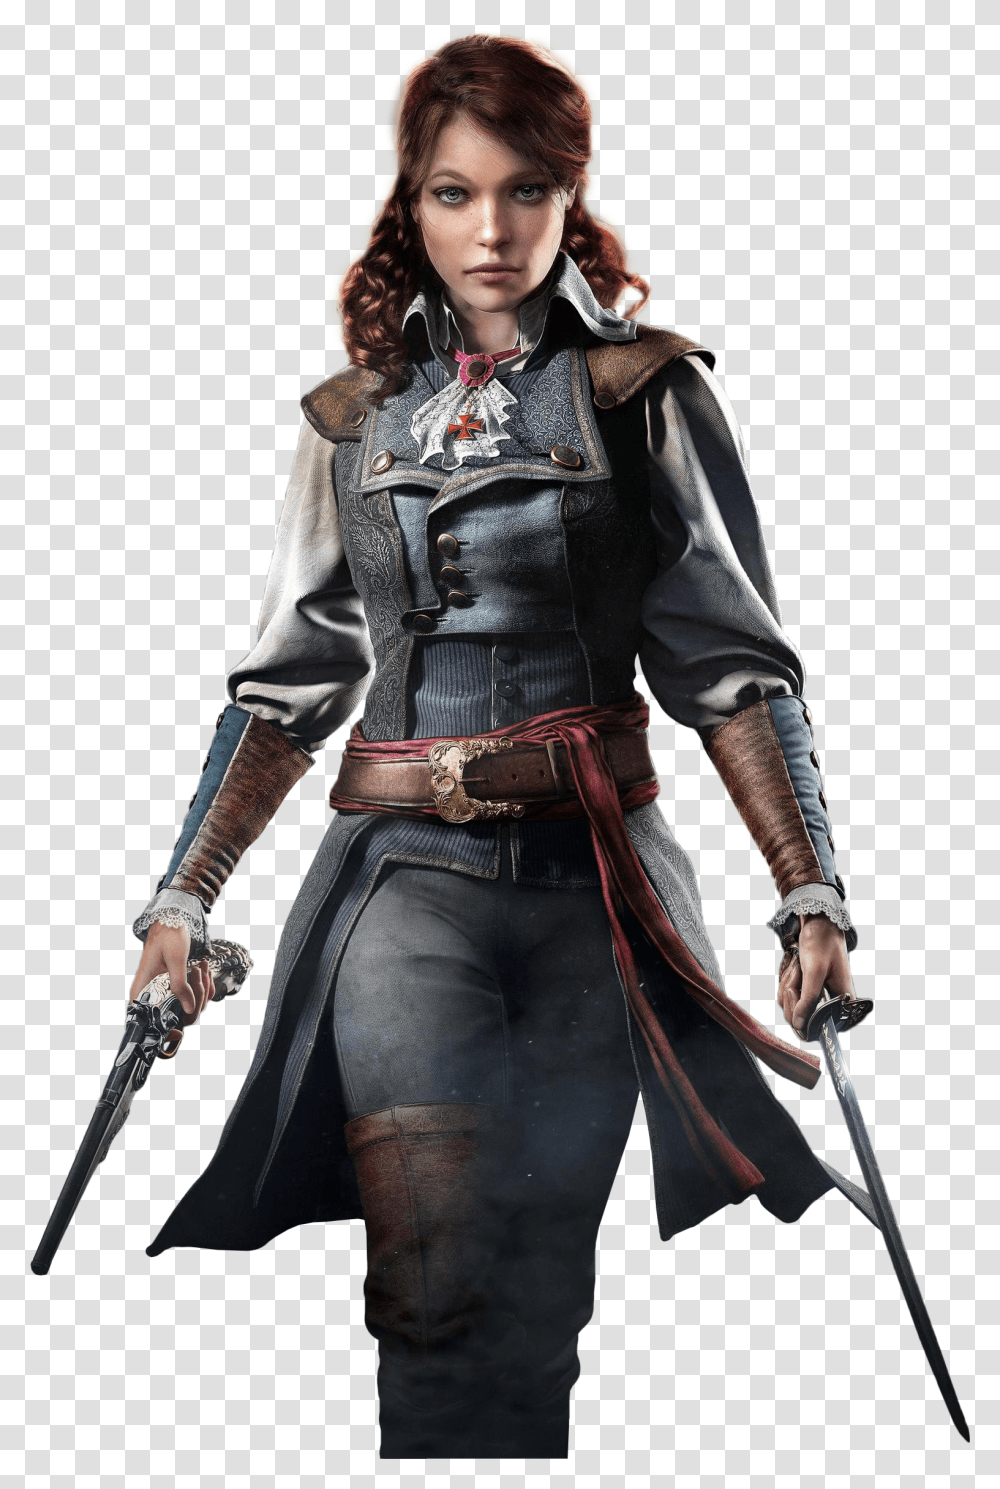 Image Result For Elise From Assassin's Creed Unity Assassin's Creed Unity, Costume, Person, Female Transparent Png